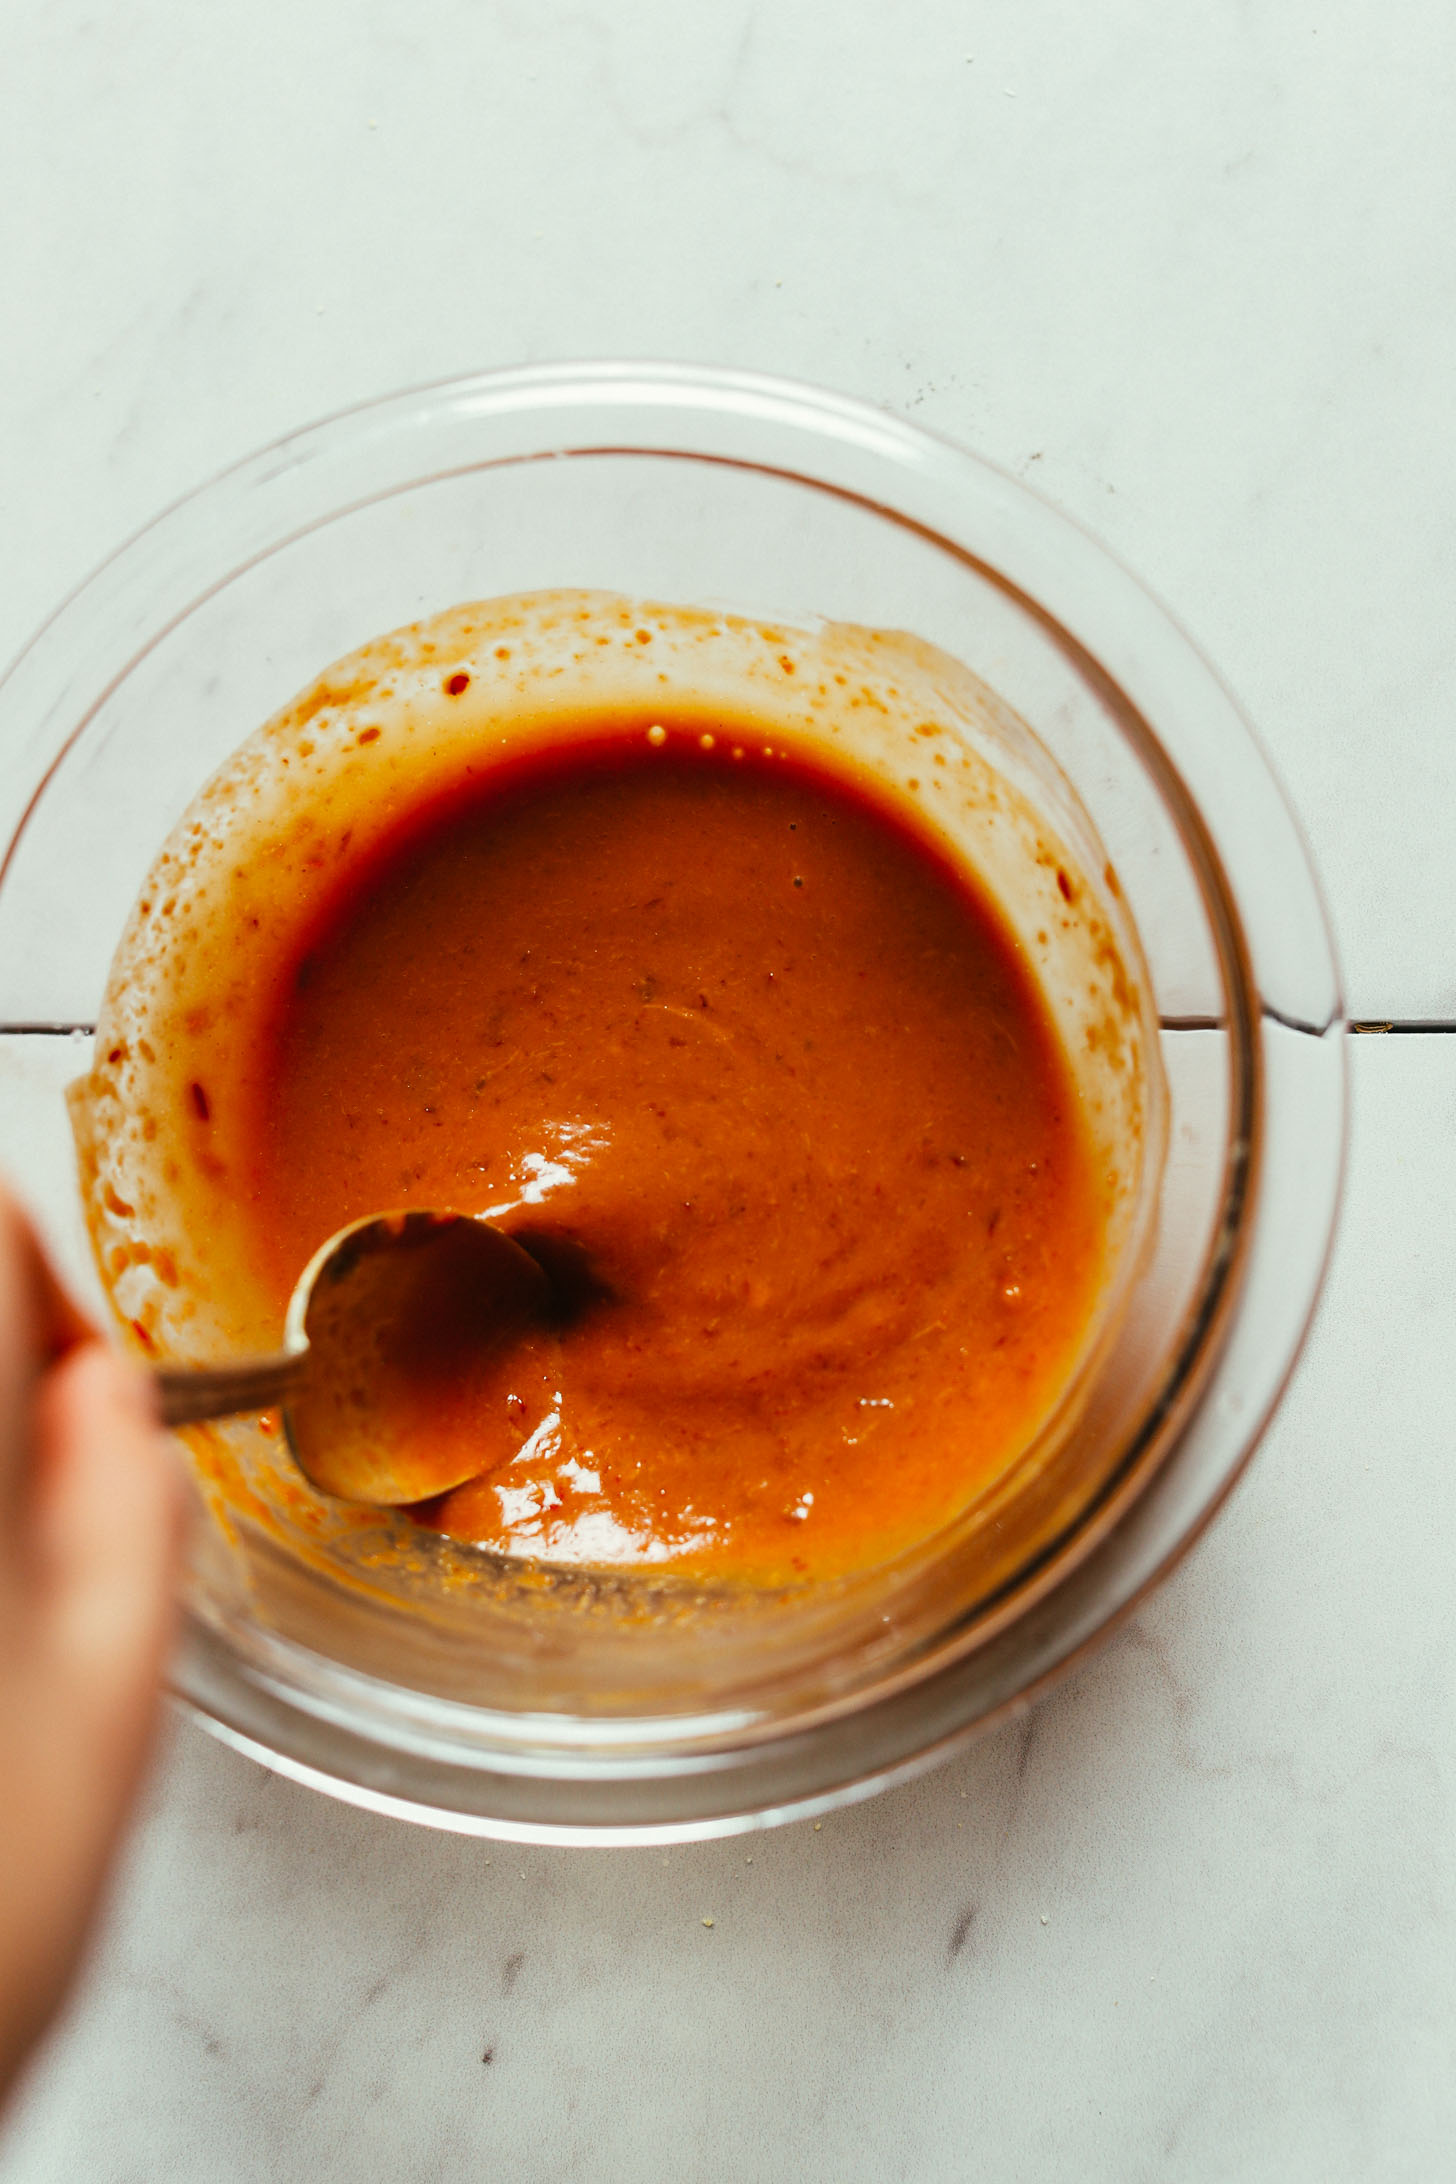 Using a spoon to stir a bowl of our homemade peanut sauce for making Peanut Tofu